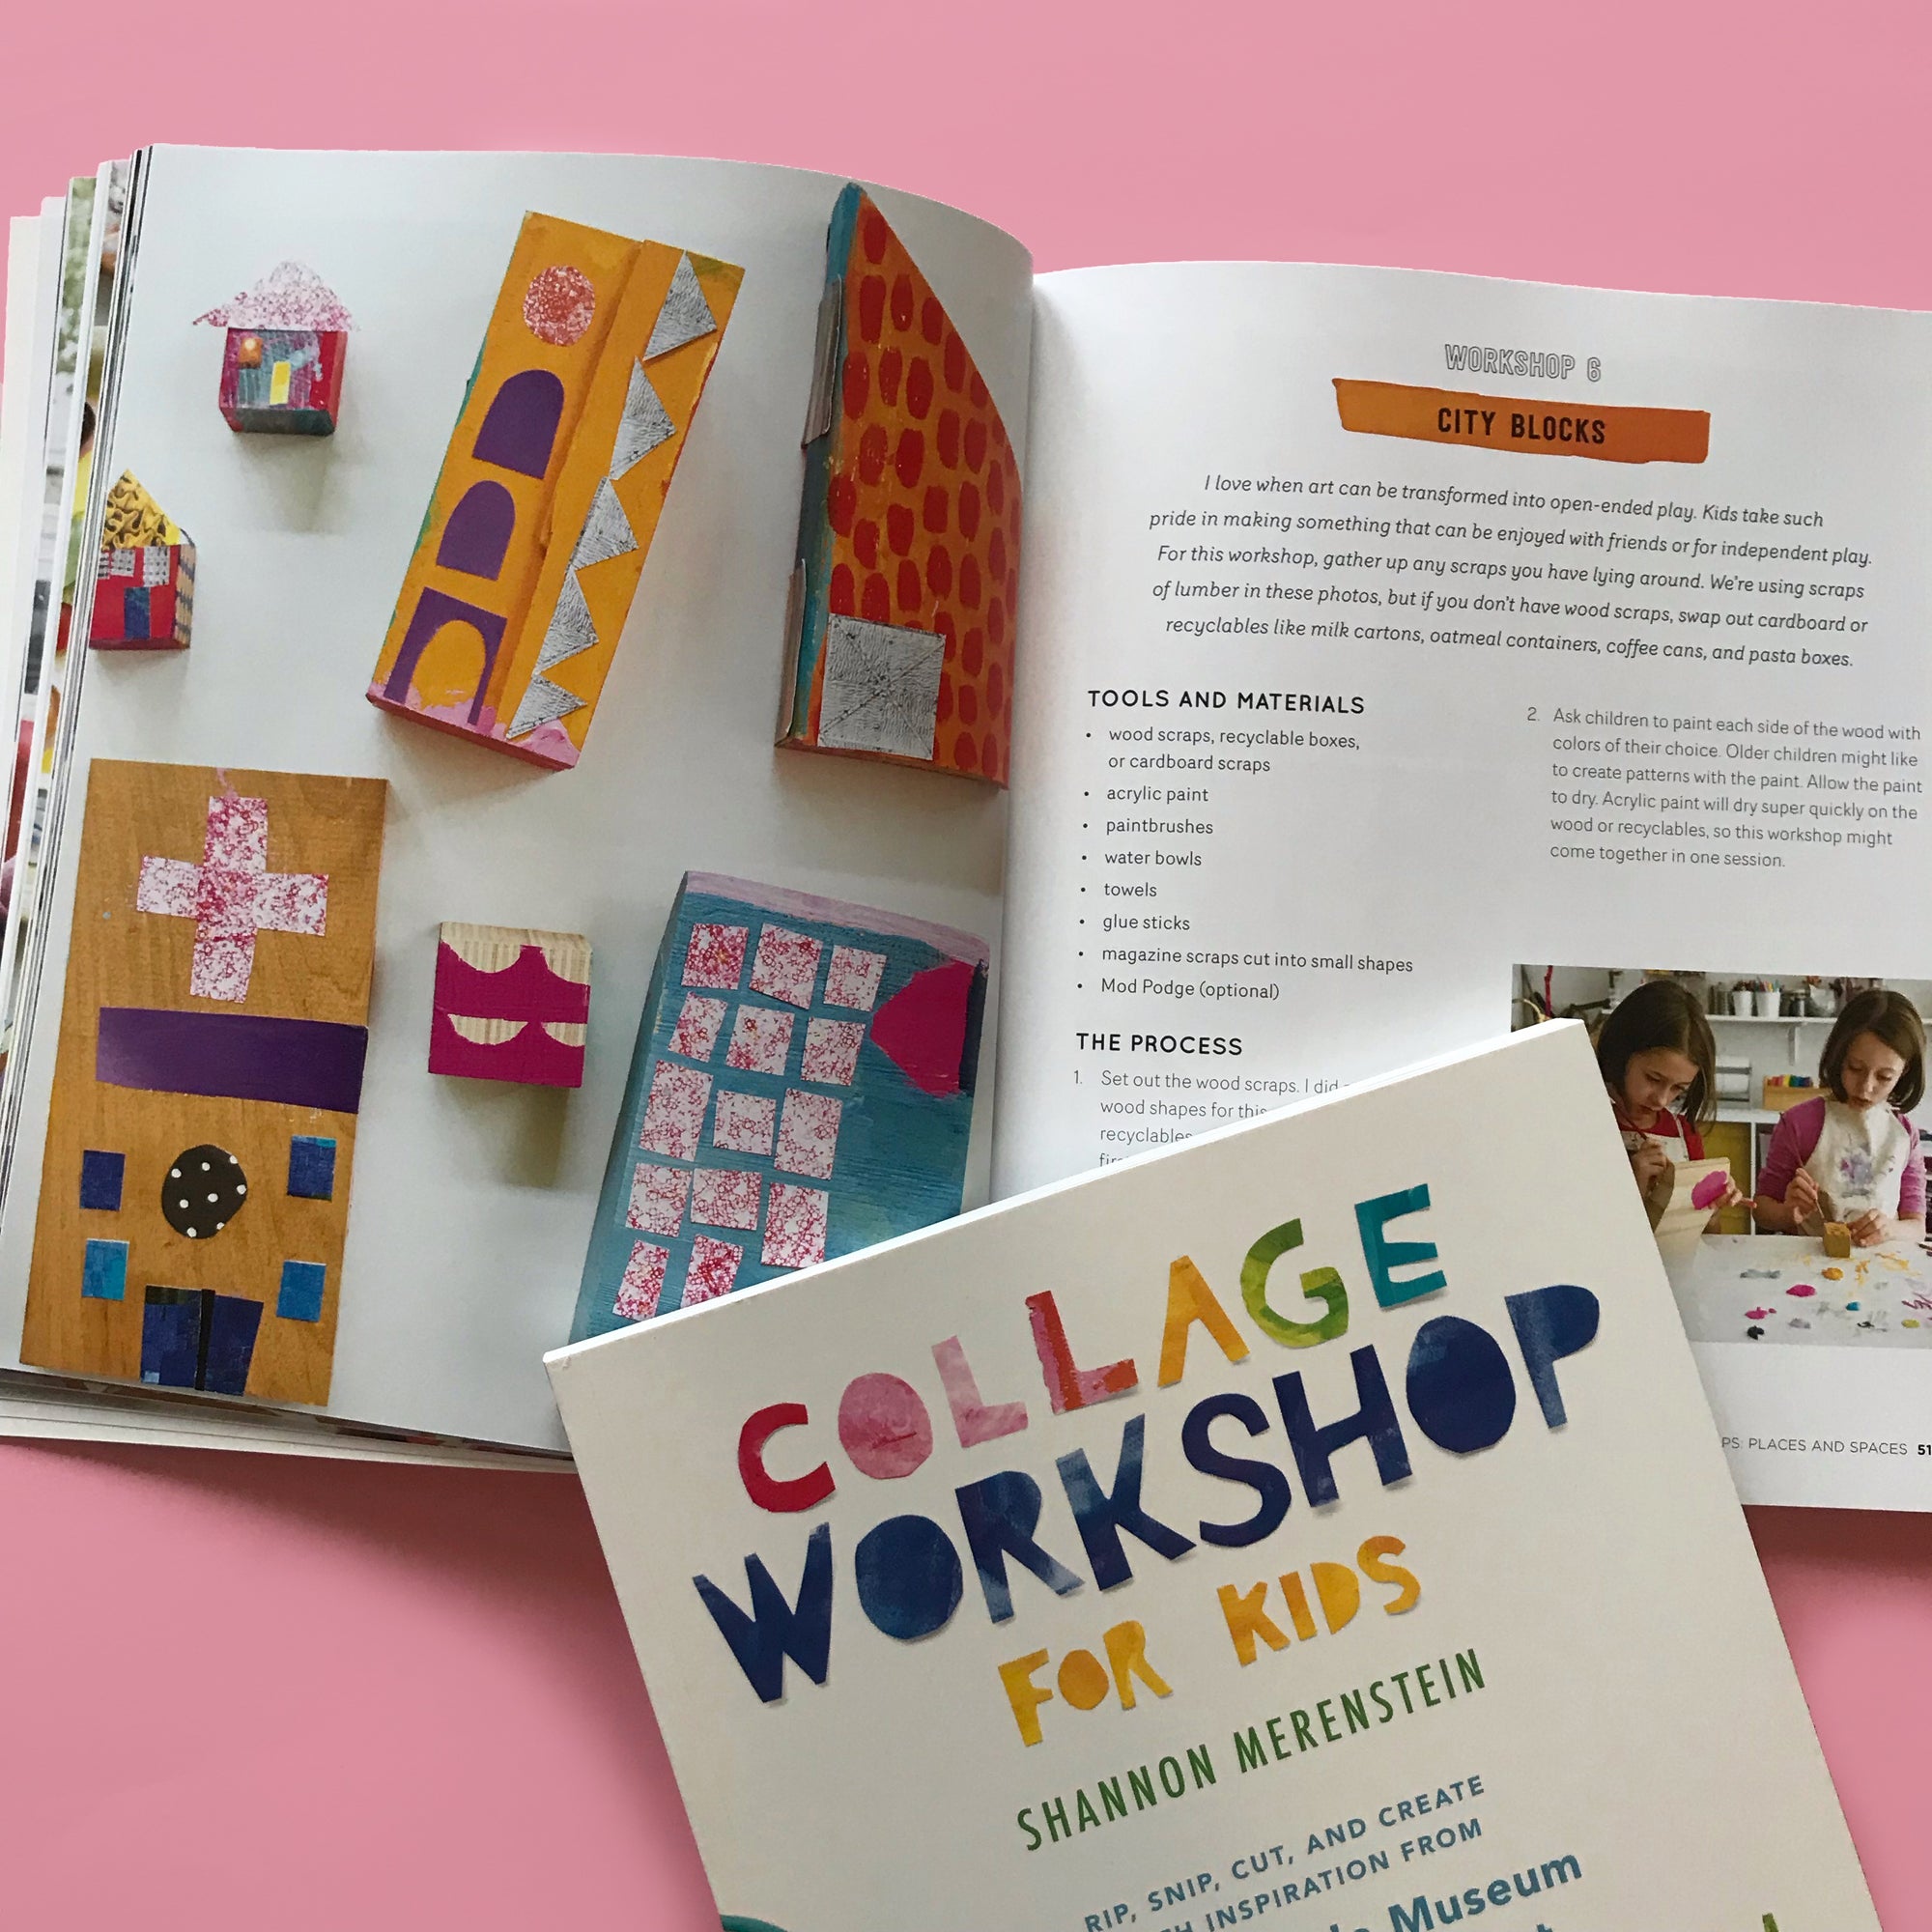 Collage Workshop For Kids - preorder - orders shipped by 27th Sept